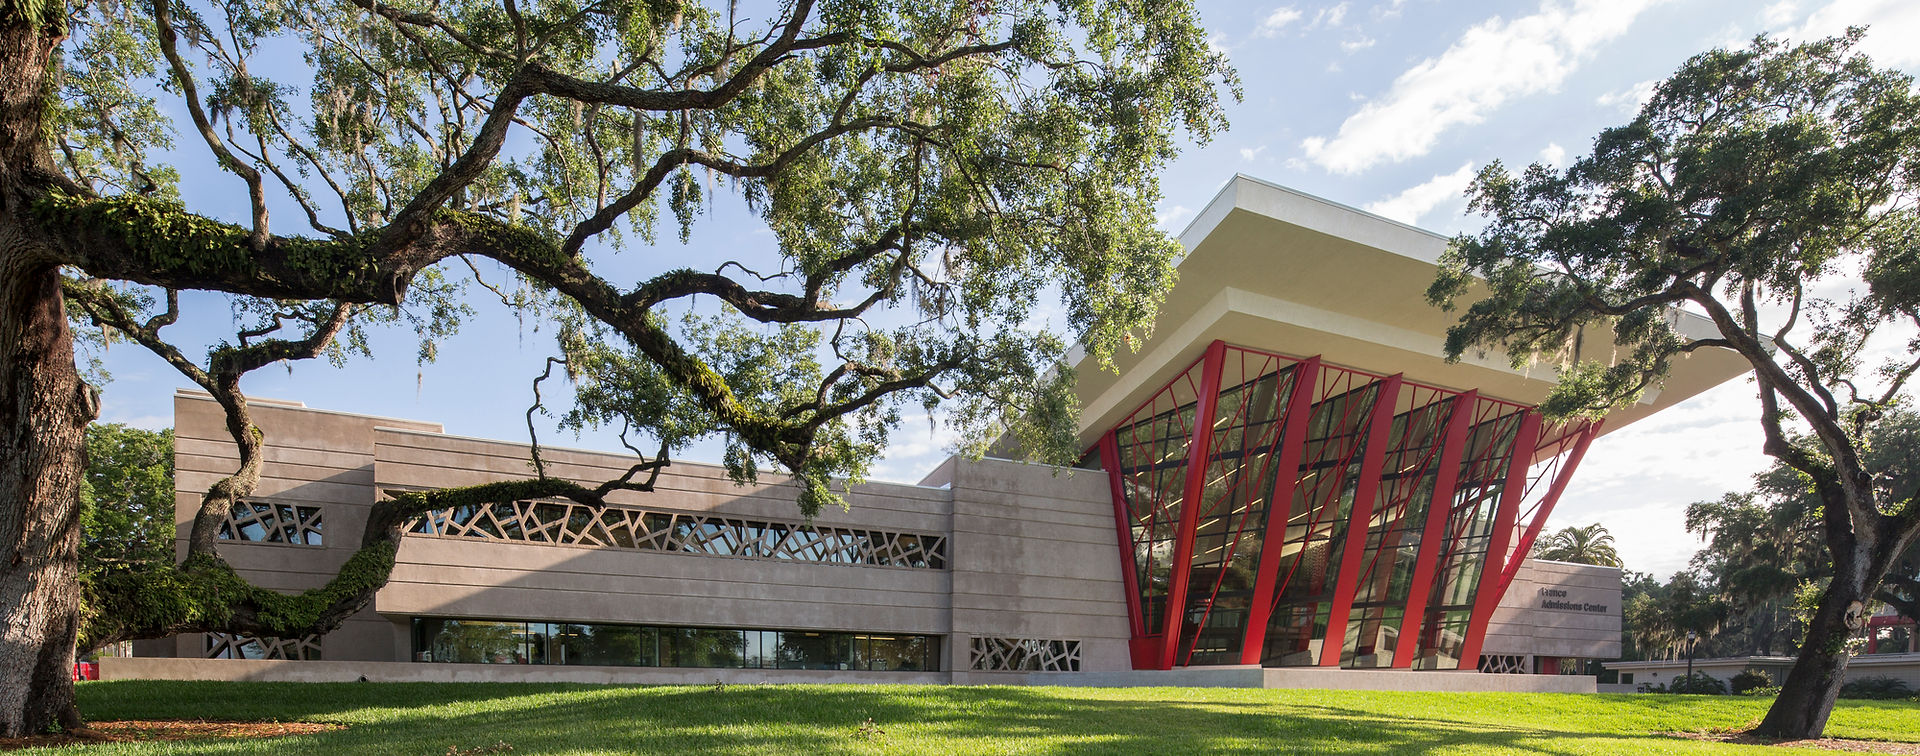 Dynamic image of a striking architectural building with angled red columns holding up a pergola in the front, patterned glass lining the facade. 